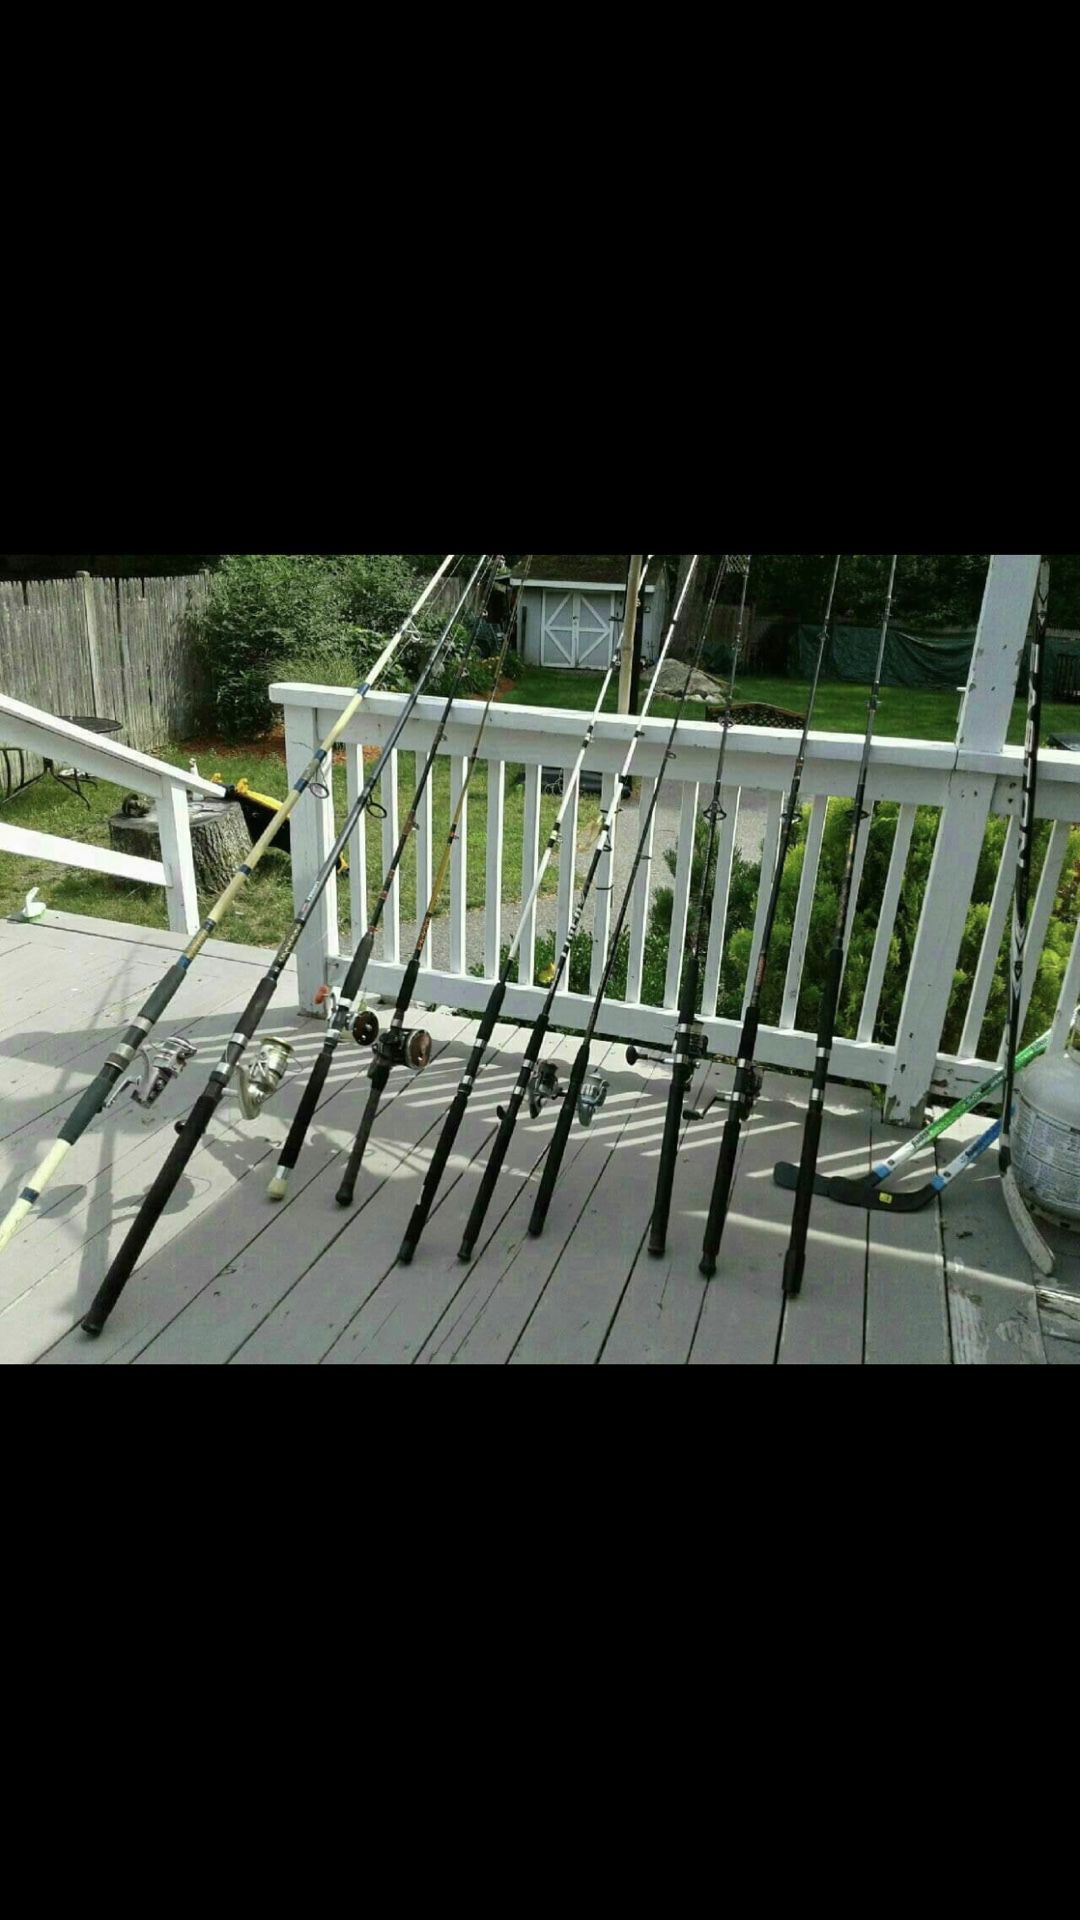 All types rods reel. More than pic shows